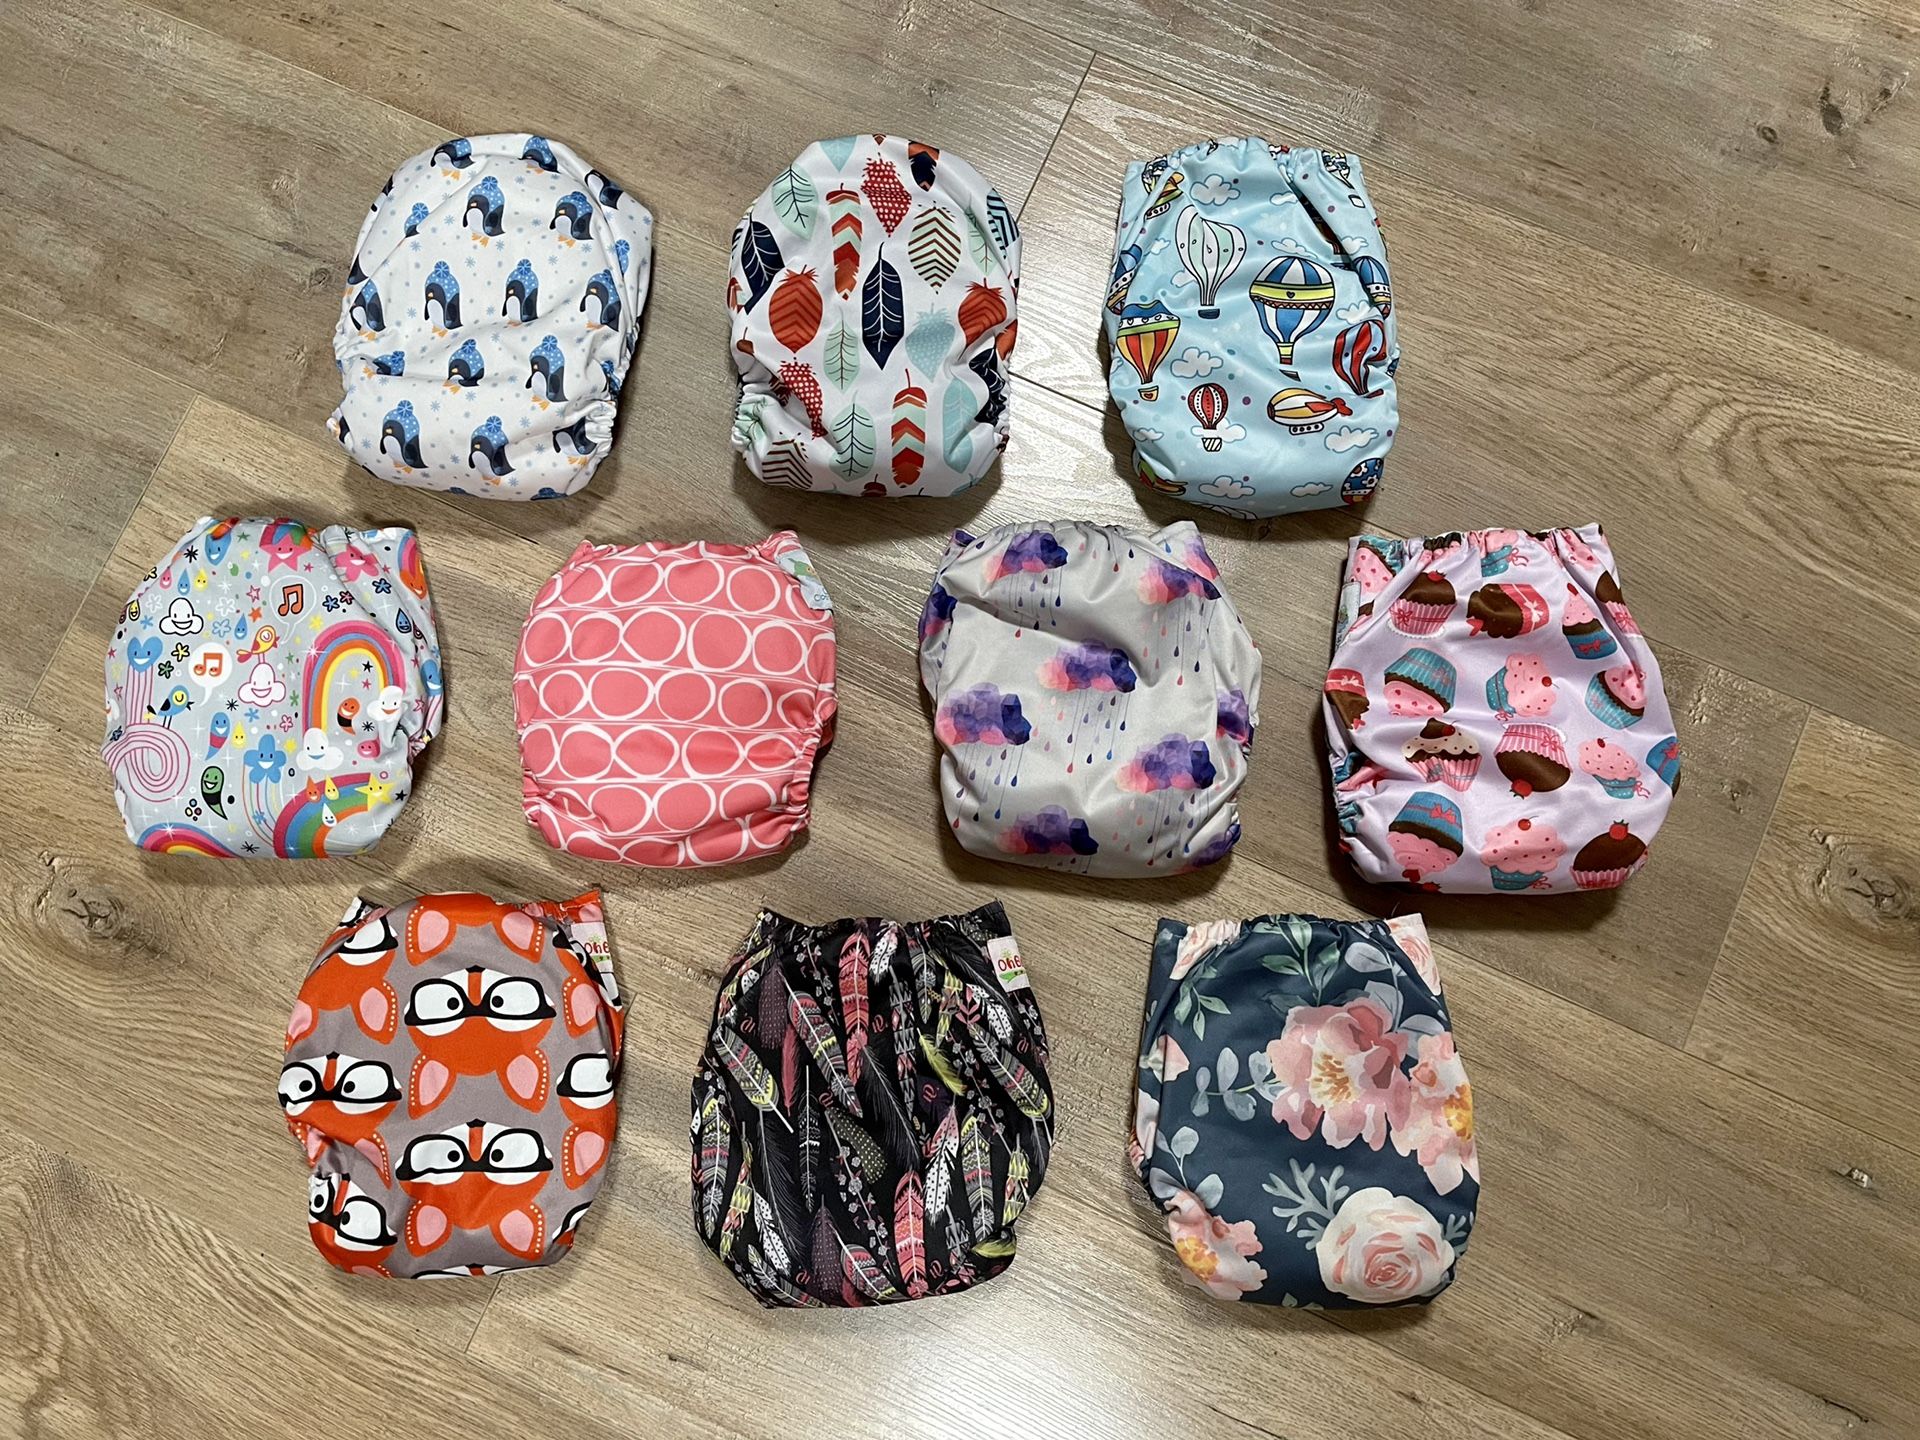 10 AIO cloth diapers, Happy Flute, OhBabyKa, Cloud Cloth Diapers, All in One bundle